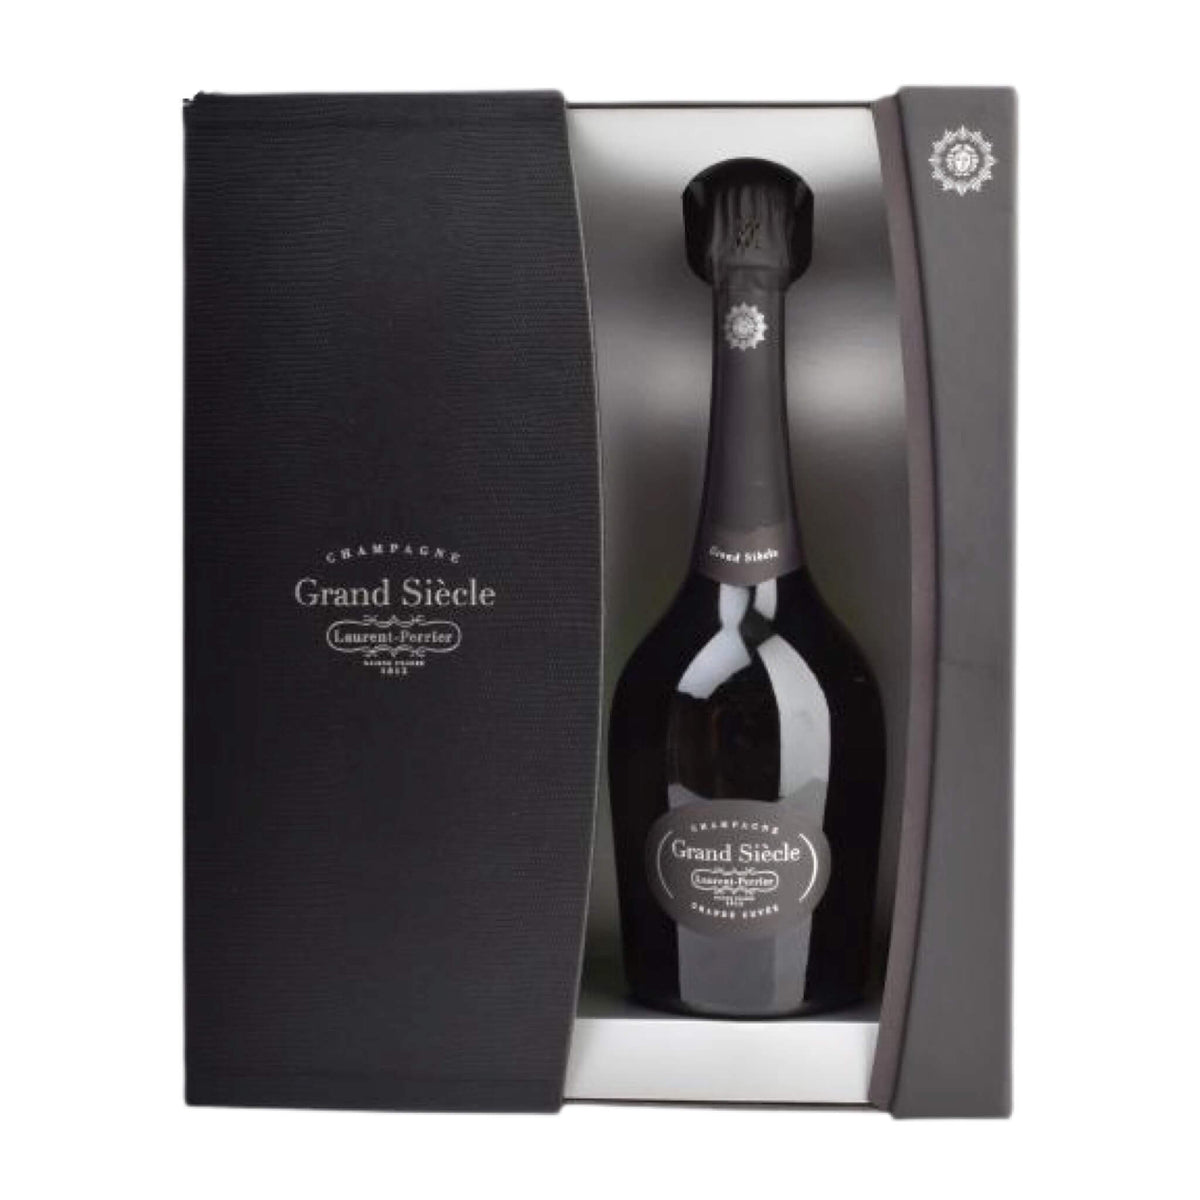 Champagne Laurent-Perrier-Champagner-Pinot Noir, Chardonnay-Grand Siecle Champagne AOC-WINECOM